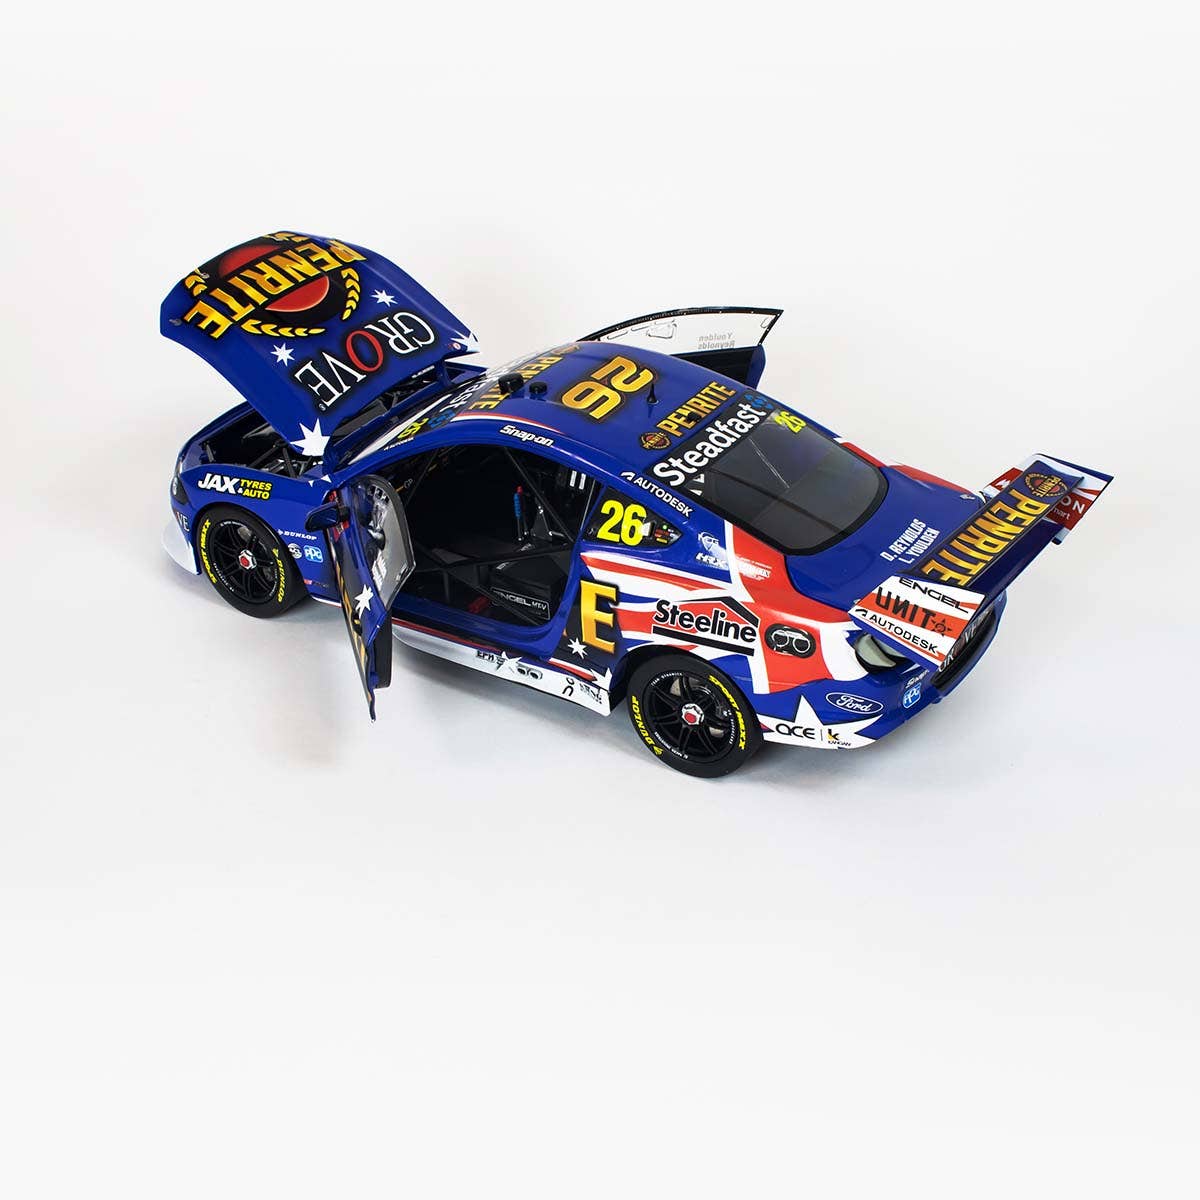 FORD GT MUSTANG - PENRITE RACING - REYNOLDS/YOULDEN #26 - REPCO Bathurst 1000 - 1:18 Scale Diecast Model Car